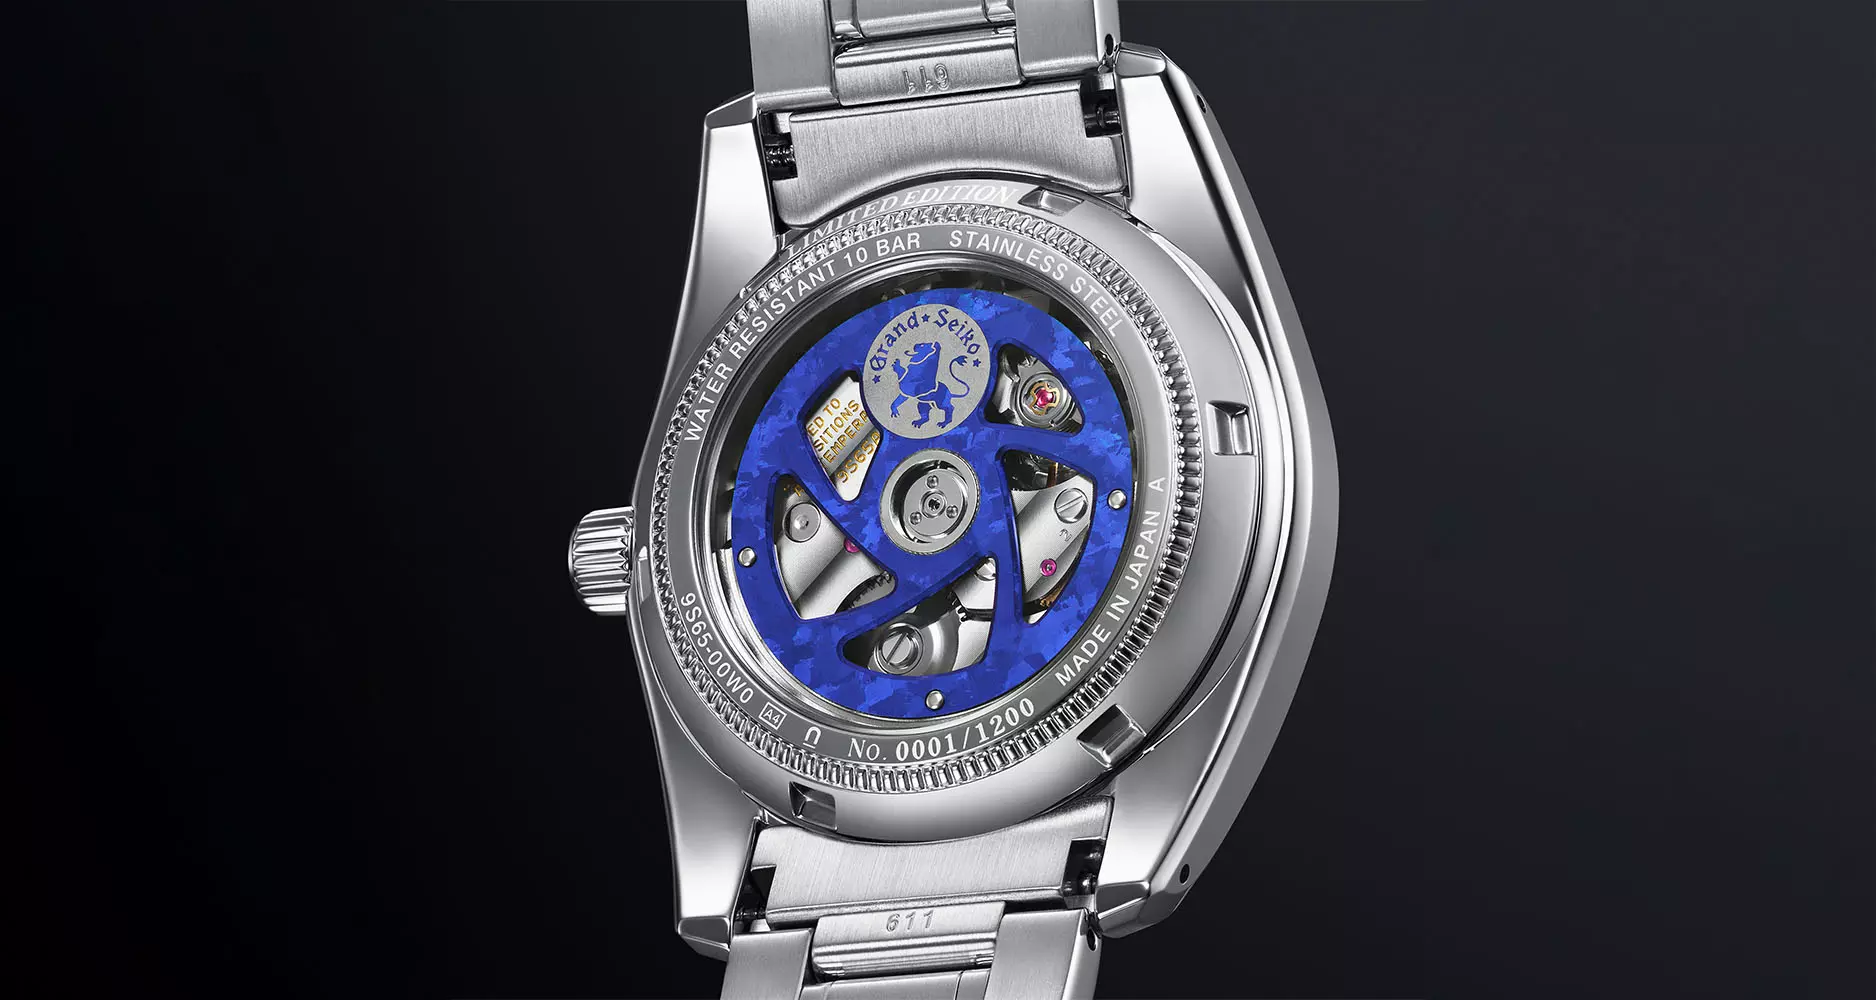 The vivid blue anodised oscillating rotor of the Calibre 9S65 is visible through the sapphire caseback.